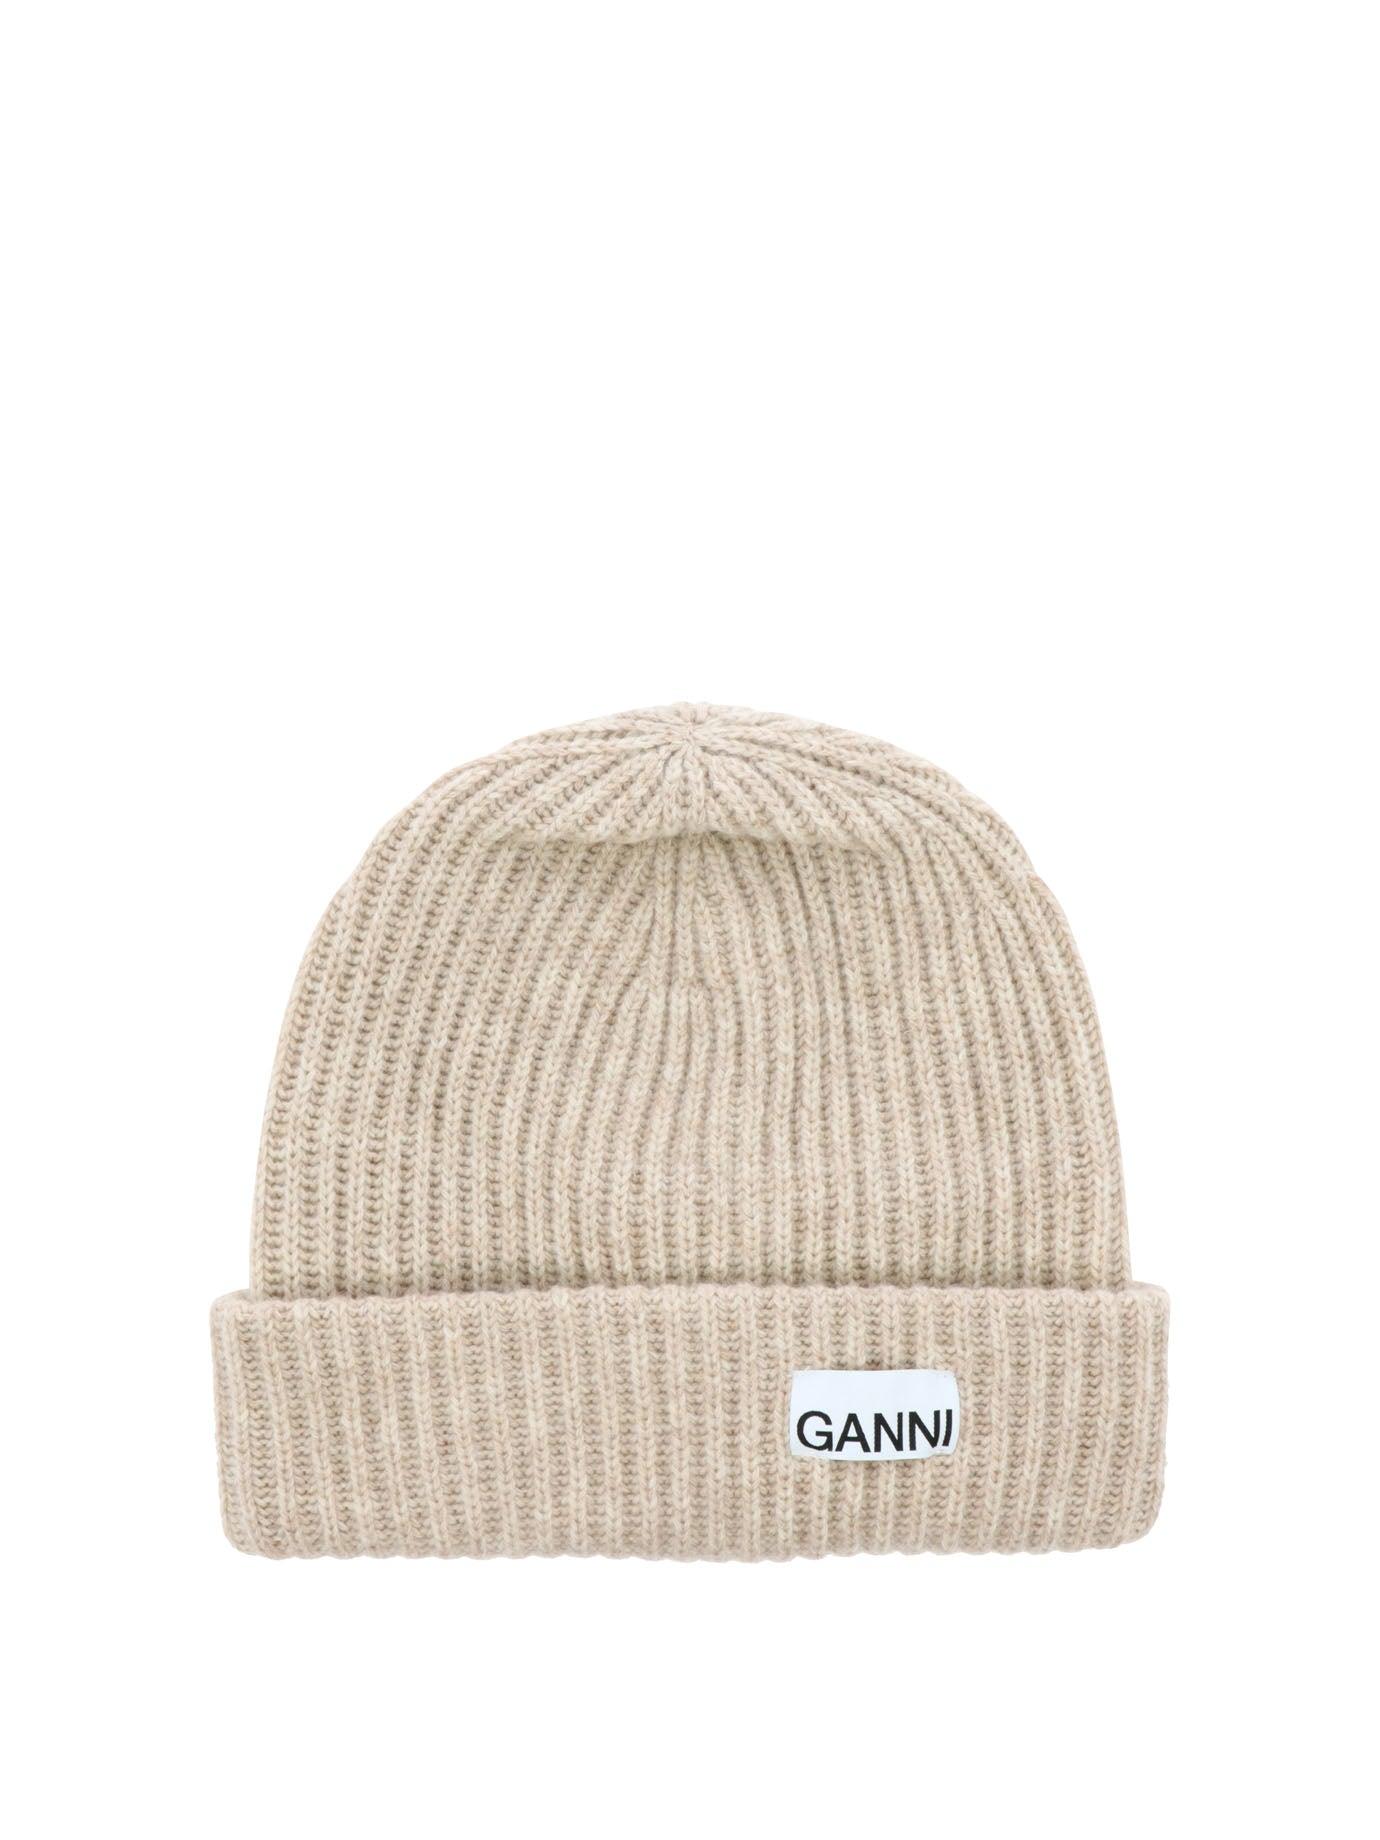 Ganni Ribbed Beanie With Patch in Natural | Lyst